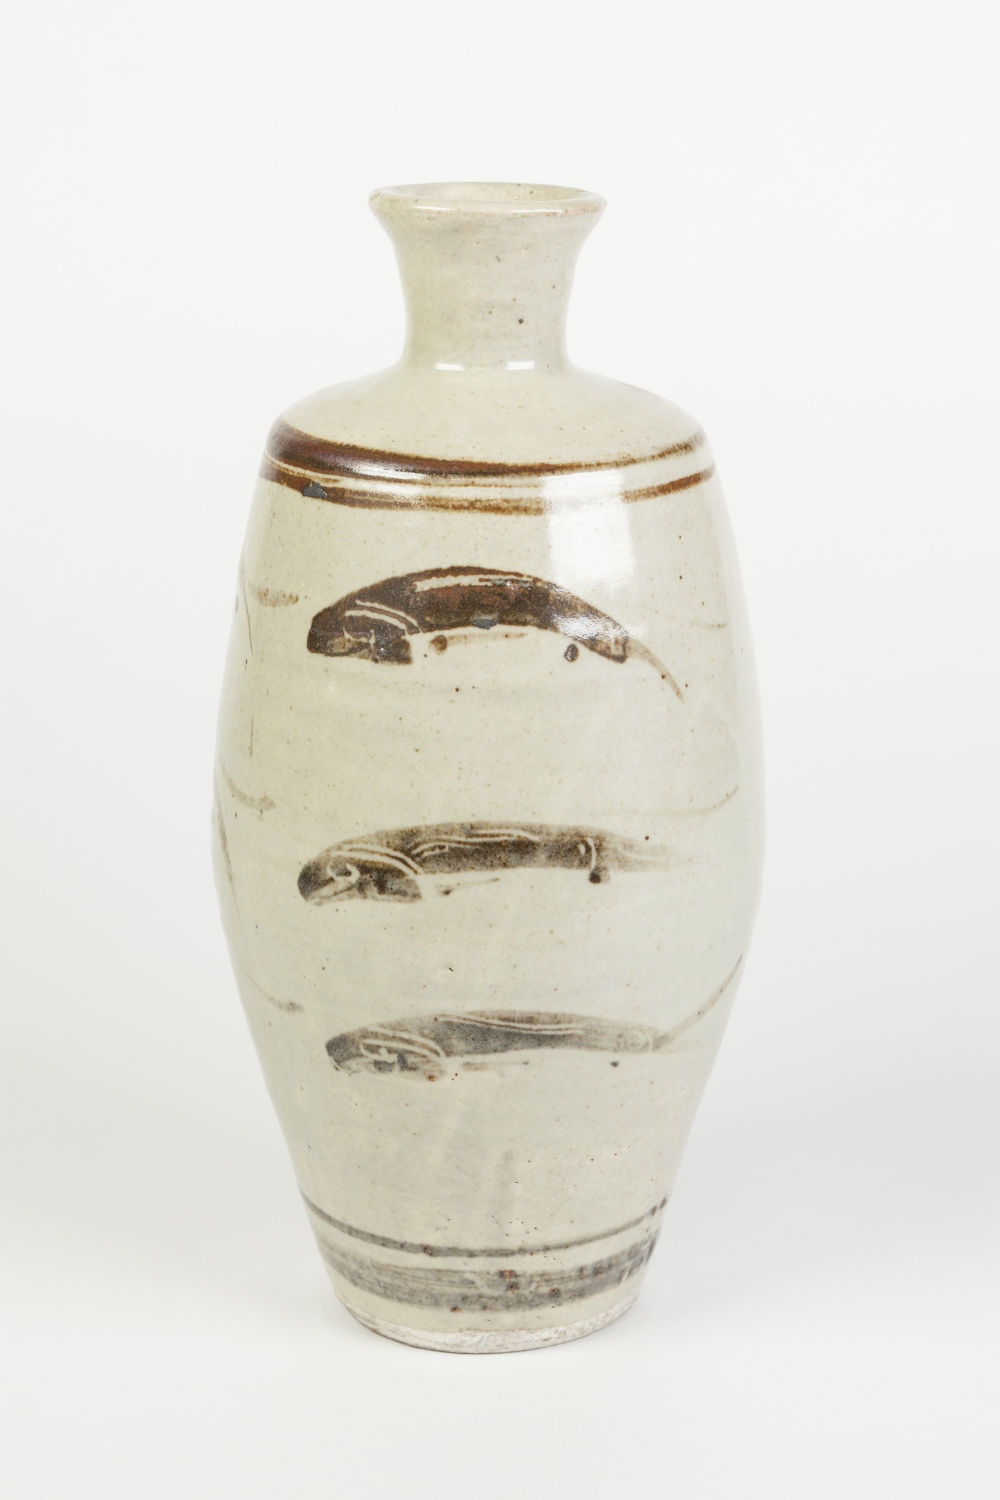 A BERNARD LEACH (ST. IVES, CORNWALL) STUDIO POTTERY VASE, of oviform with short trumpet neck, the